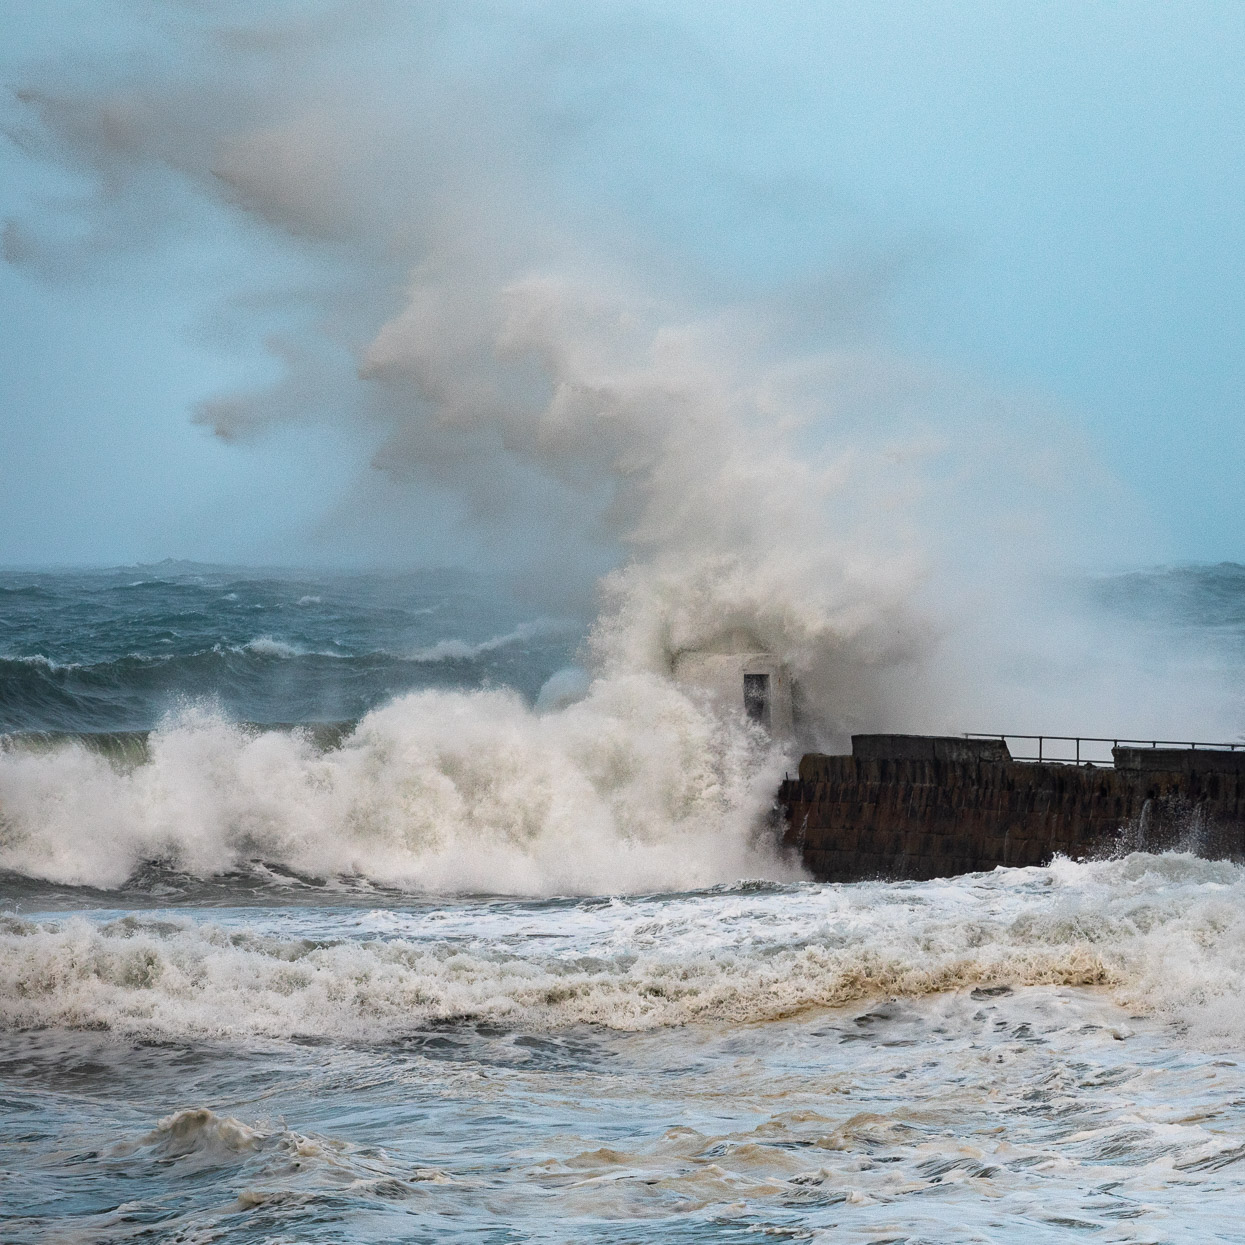 A giant wave towers above the breakwater at Portreath, Cornwall during storm Ciara - David Gibbeson